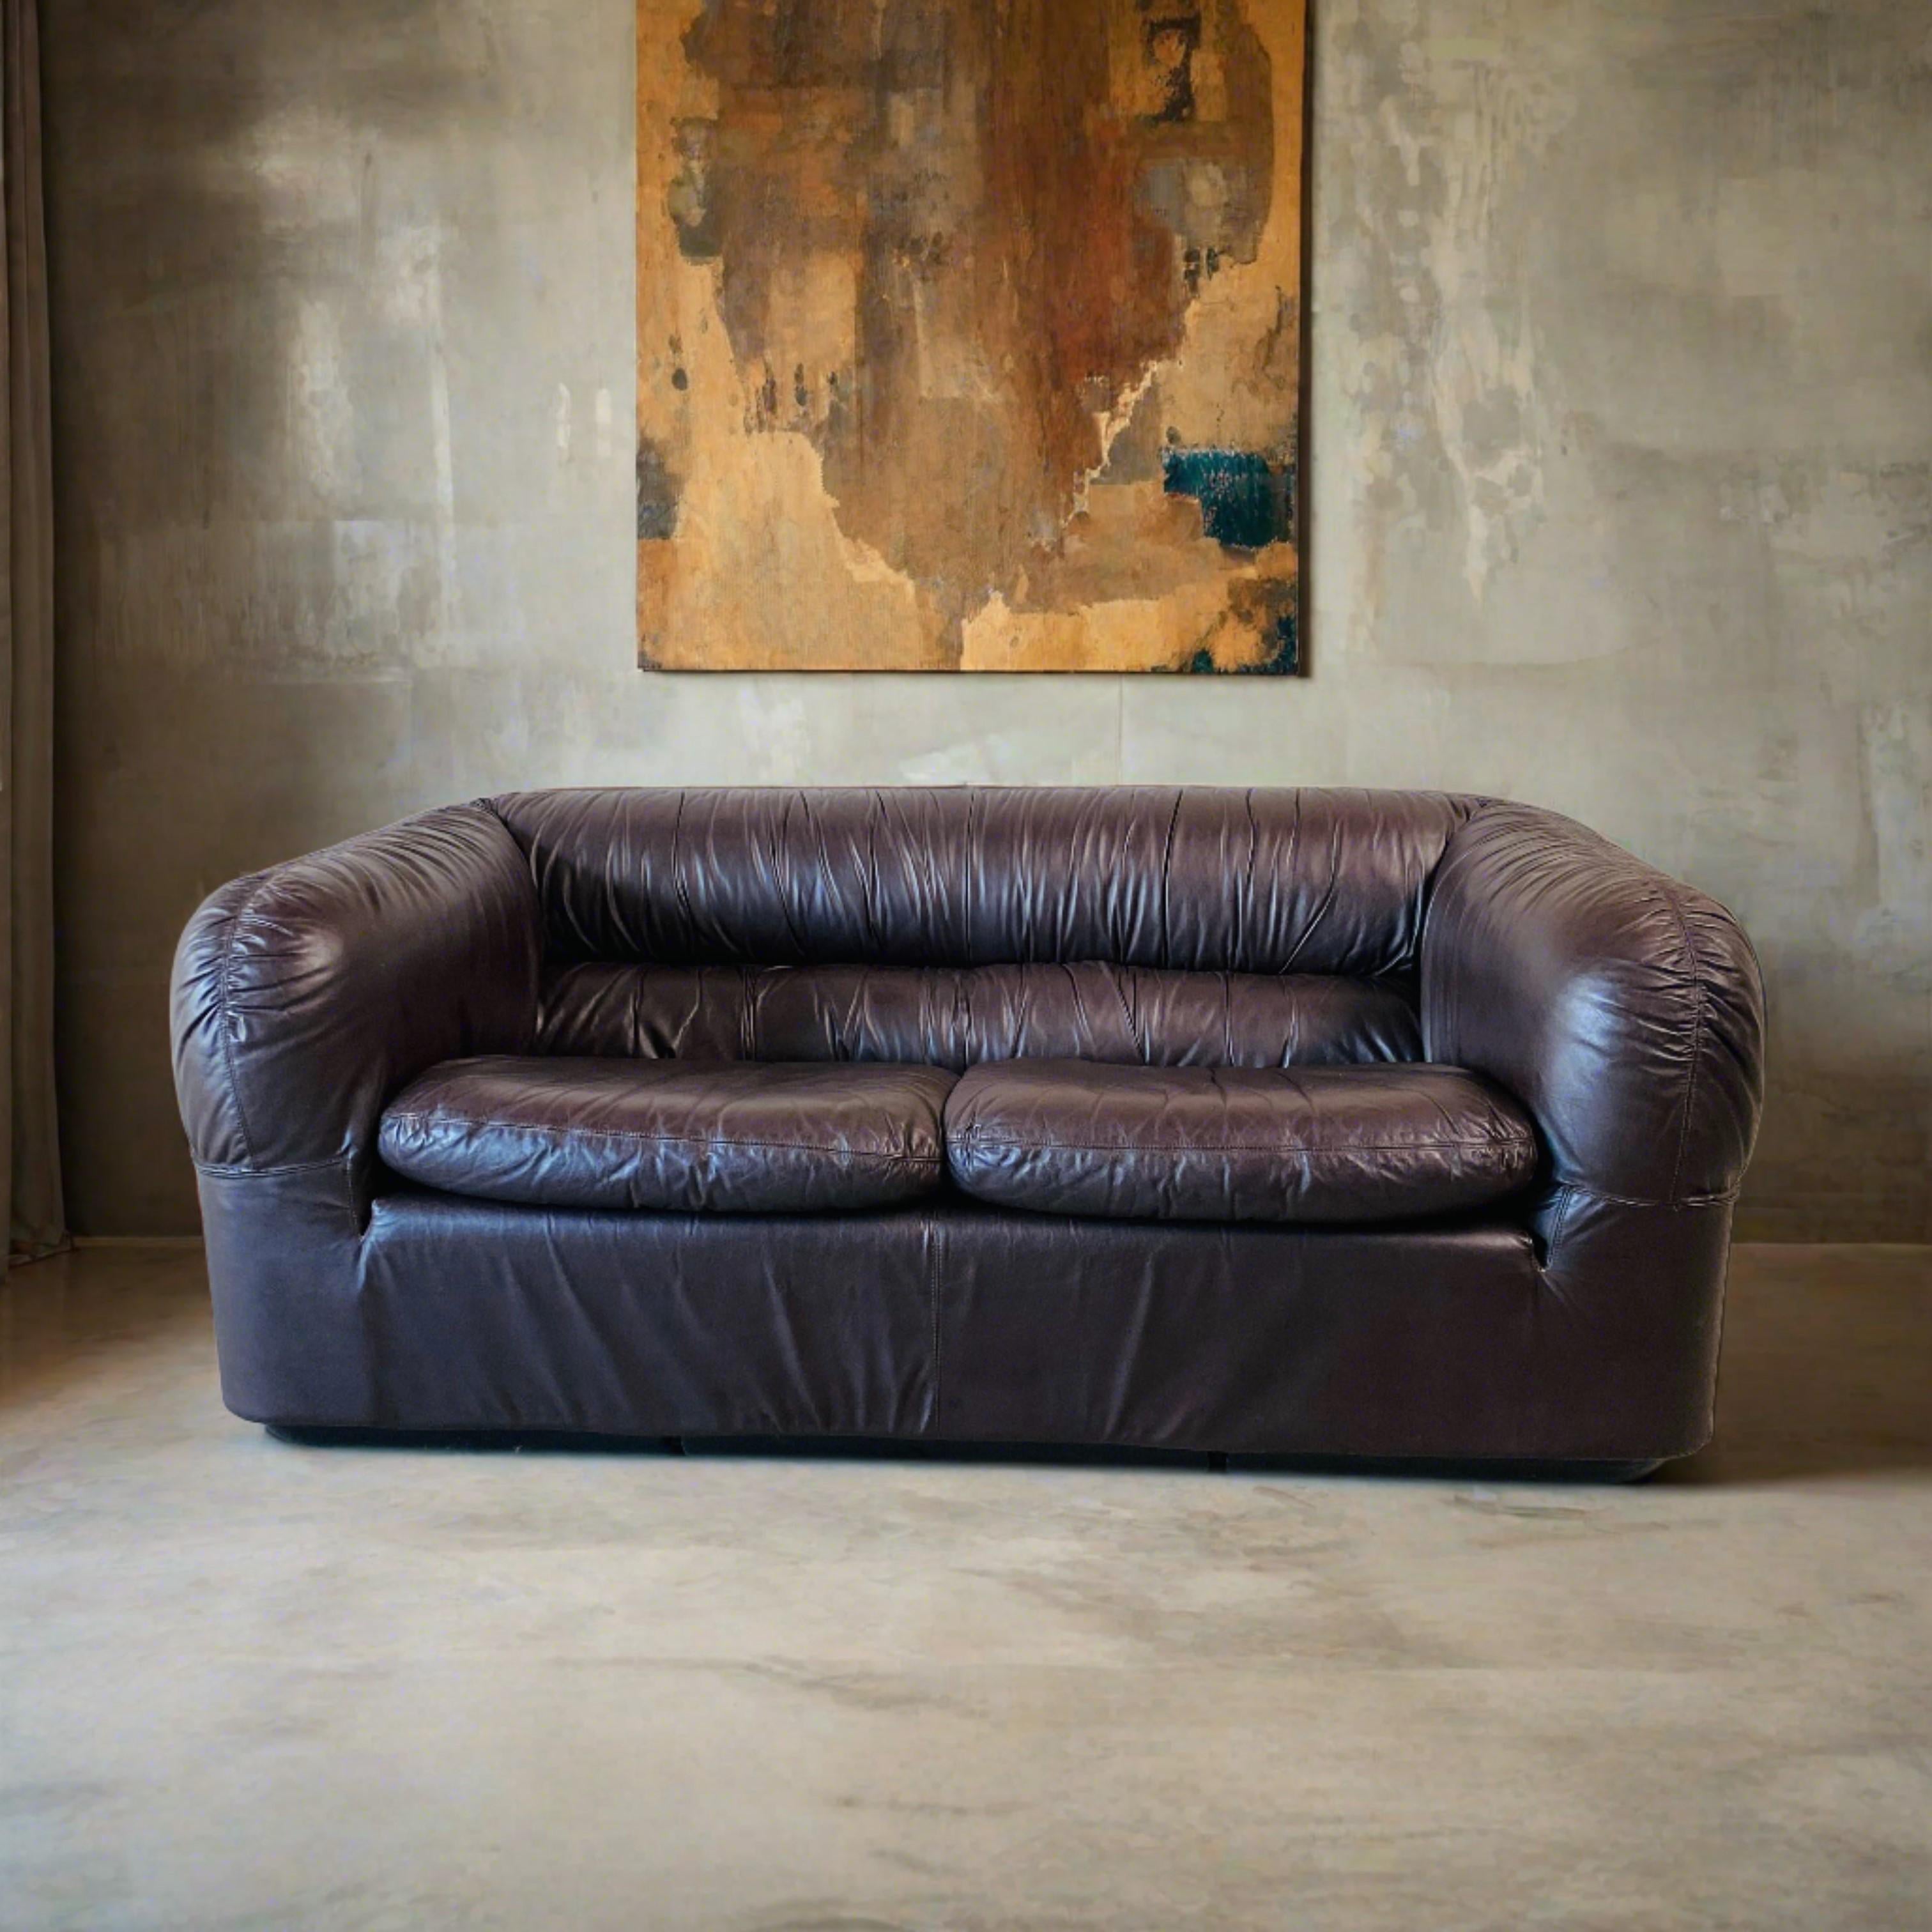 Title: Vintage Brown Leather 2-Seater Sofa - Classic Italian Design

Indulge in timeless elegance with our Vintage Brown Leather 2-Seater Sofa, crafted with meticulous attention to detail and featuring exquisite pleats sewn into luxurious leather.